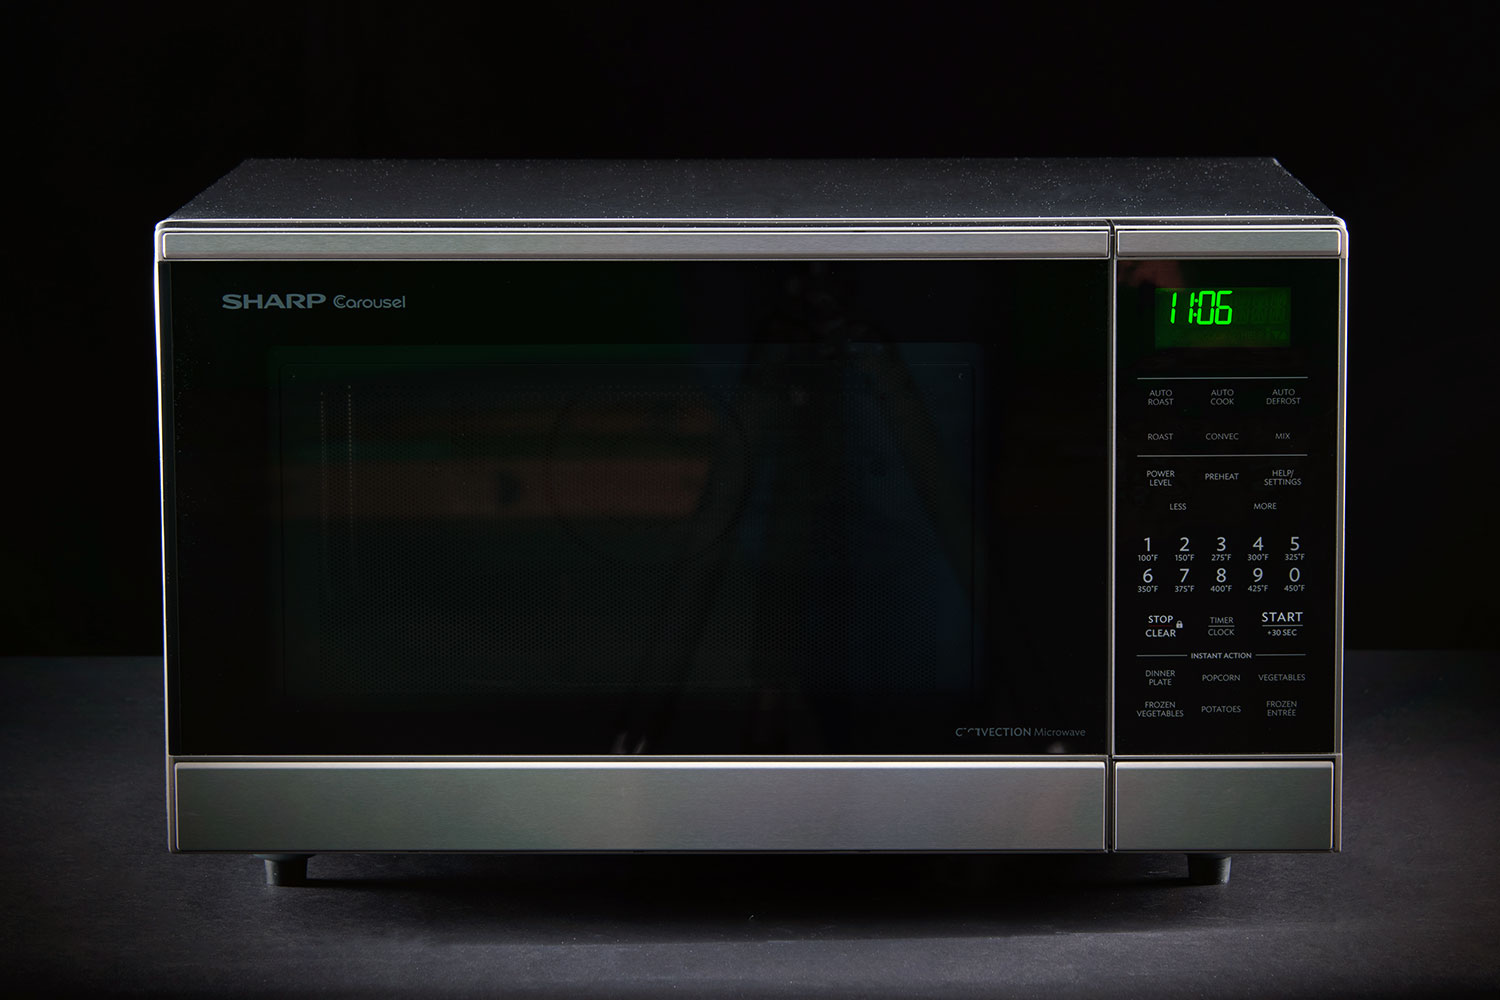 Sharp Steam Oven Review - AX1200S Convection Microwave Combo - Appliance  Buyer's Guide